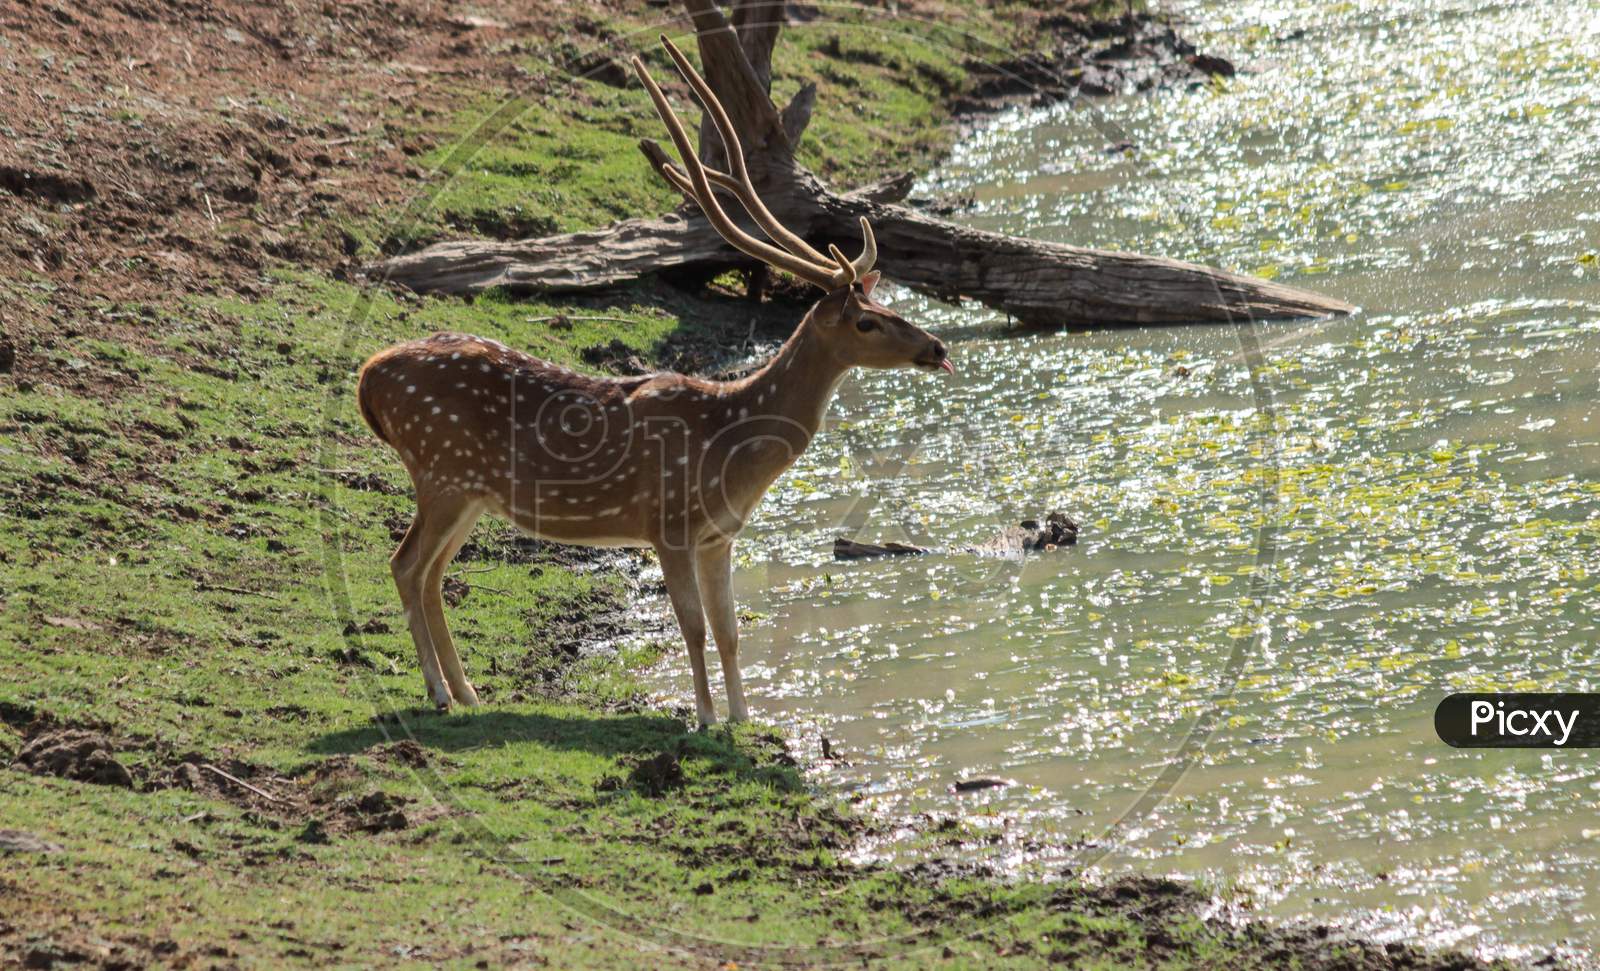 An Indian deer near a water body in forest